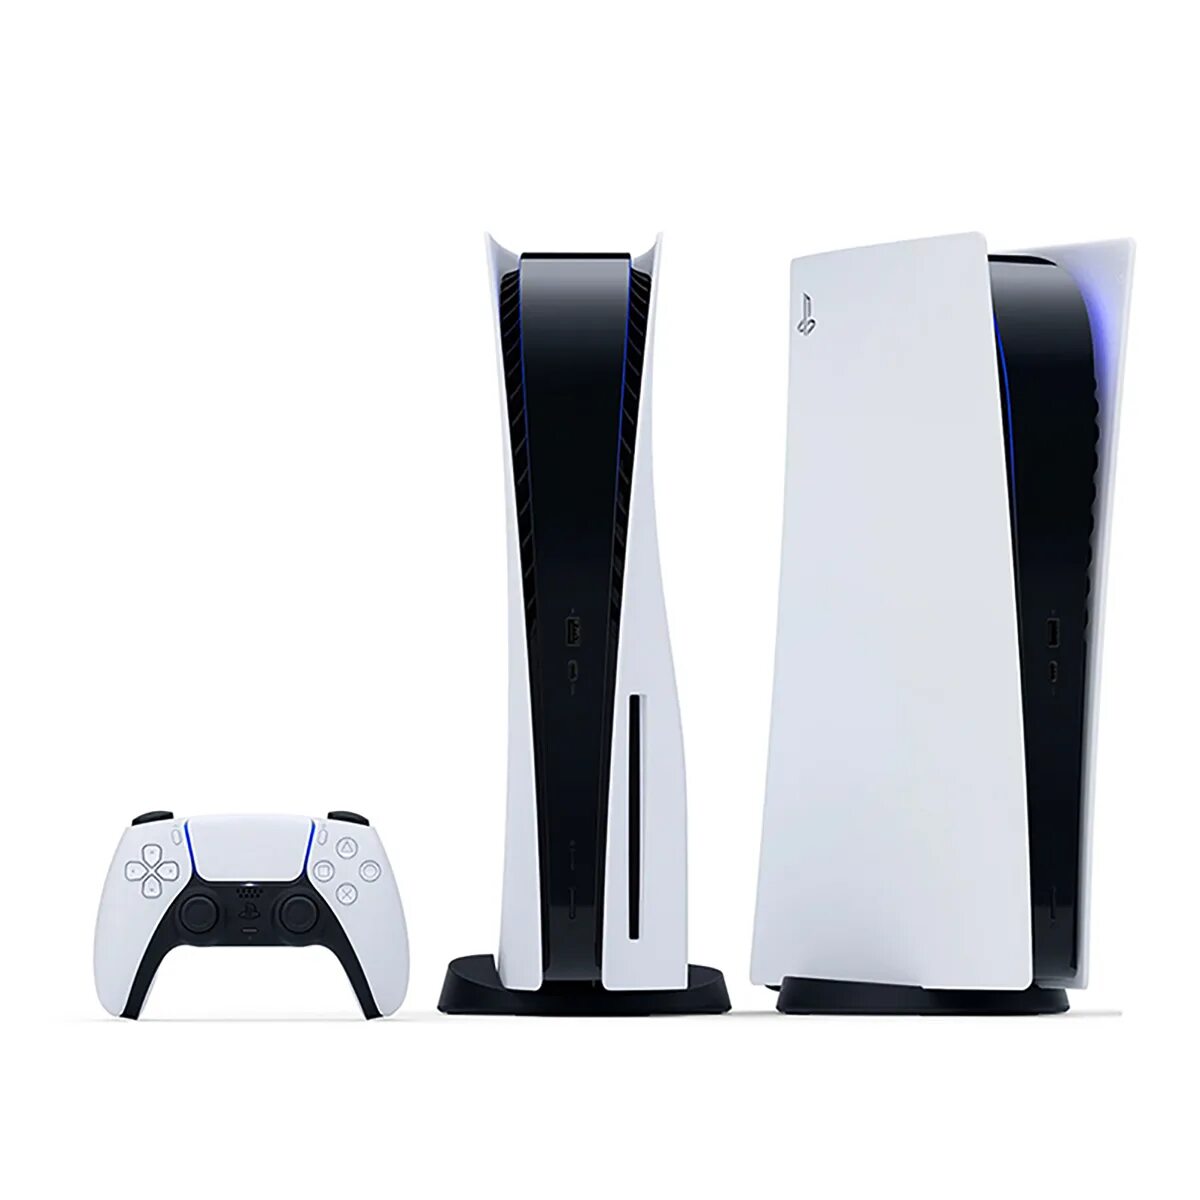 Ps5 1200a. Sony ps5. Сони плейстейшен 5. Консоль сони плейстейшен 5. Sony PLAYSTATION ps5 Console.